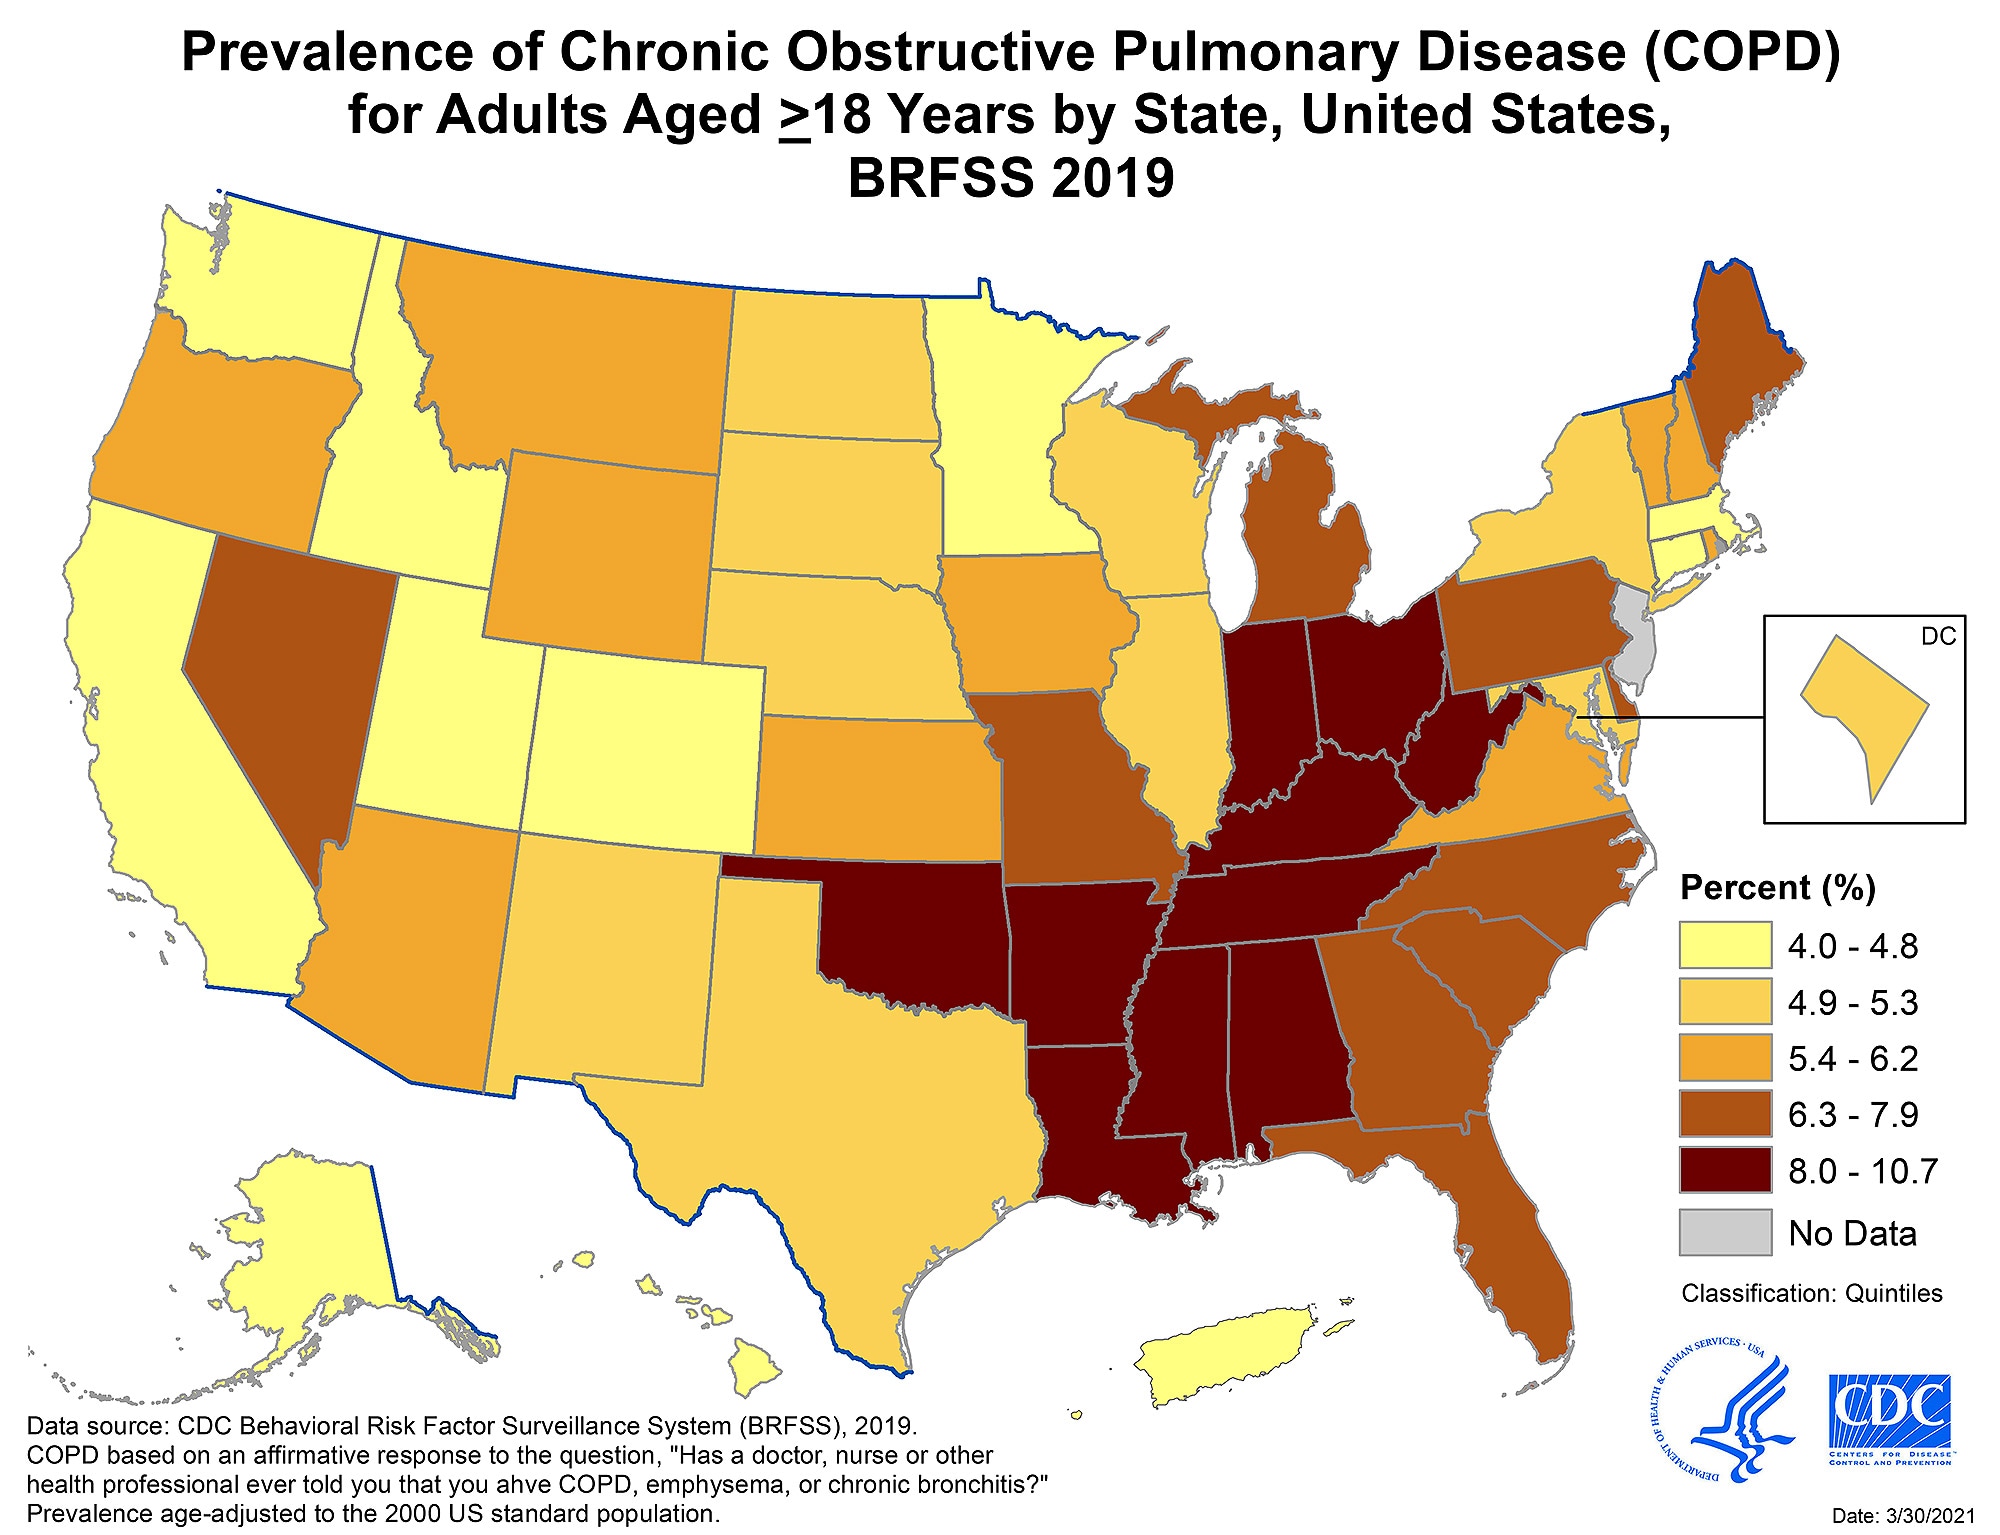 COPD prevalence varied by state, from under 4.5 percent in CA, CO, HI, MA, MN and UT, to under 9 percent in AL, AR, KY and WV